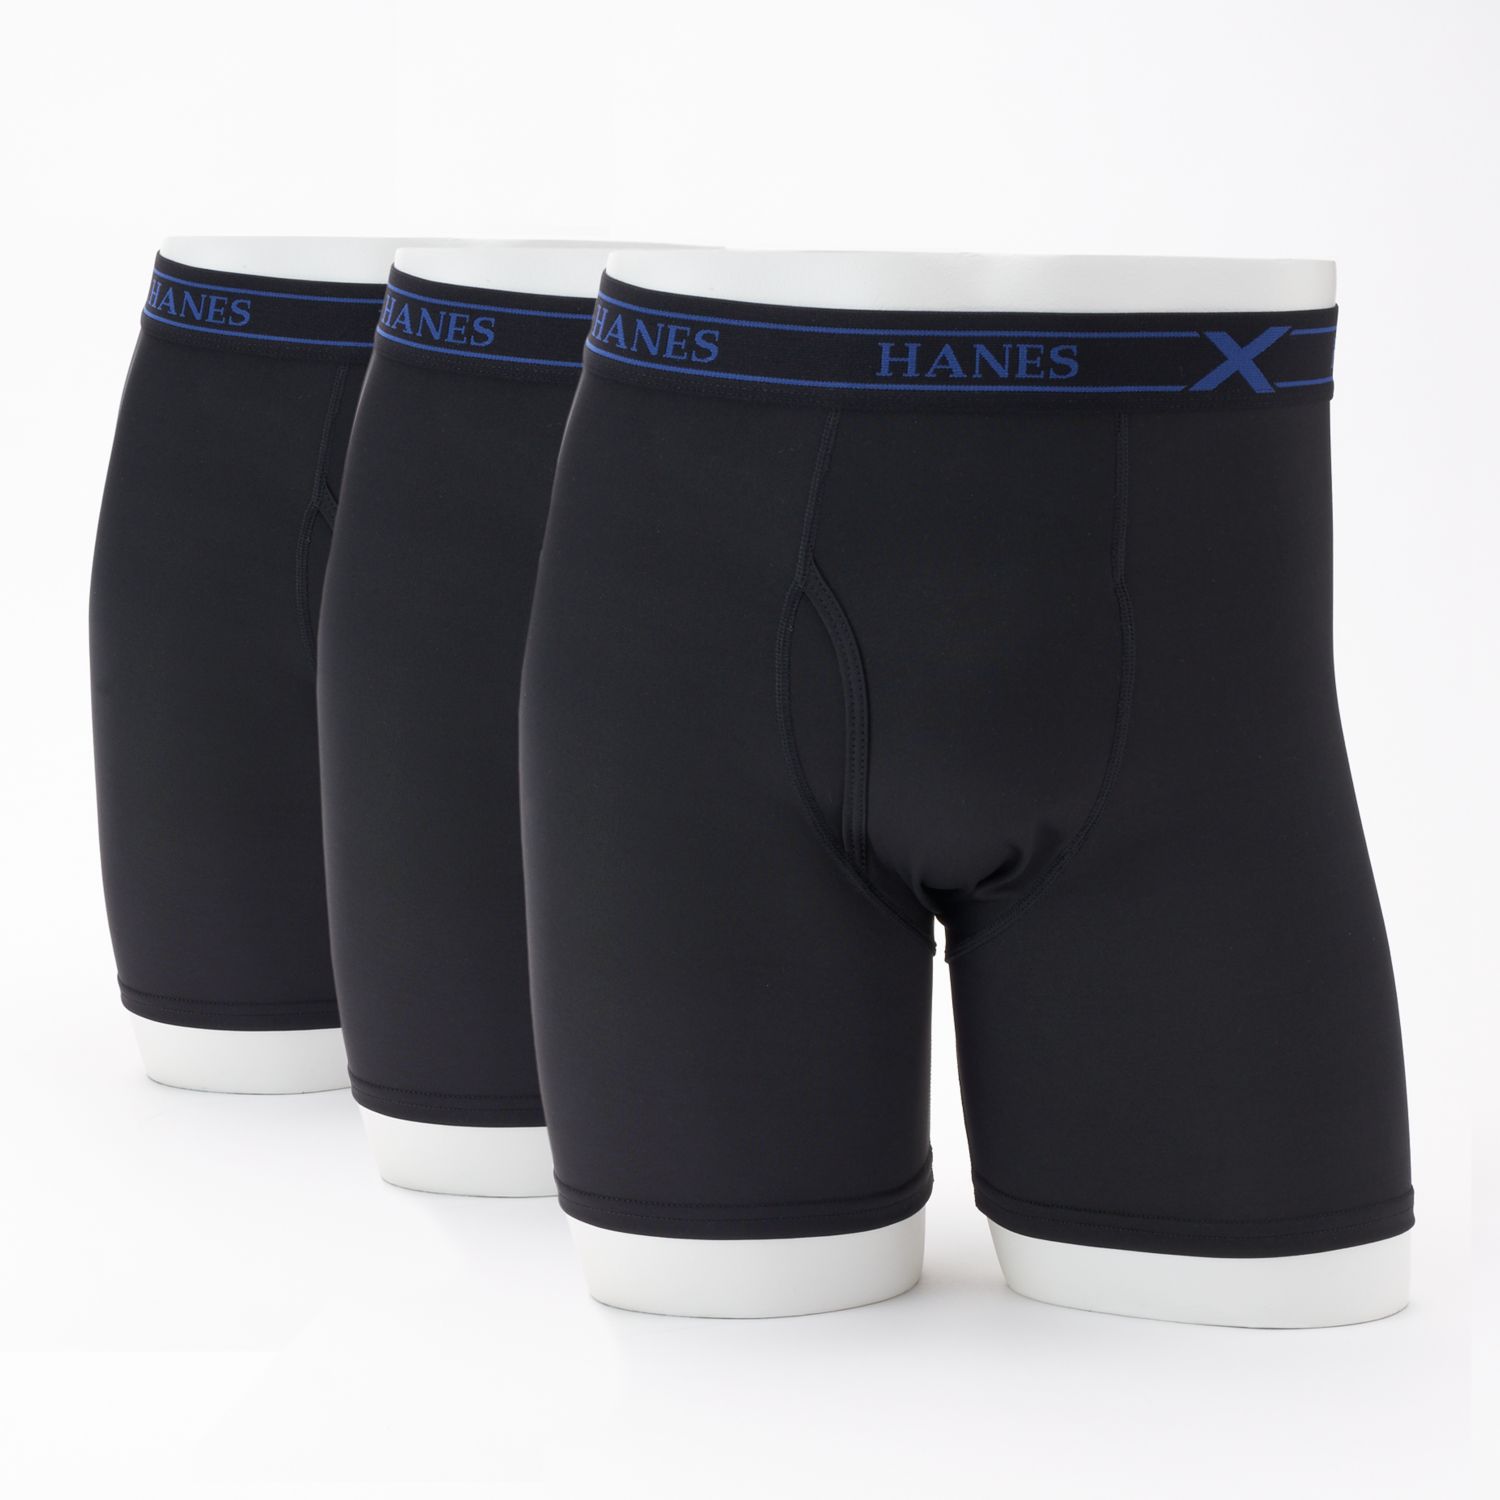 Image for Hanes Big & Tall 3-pack X-Temp Performance Boxer Briefs at Kohl's.